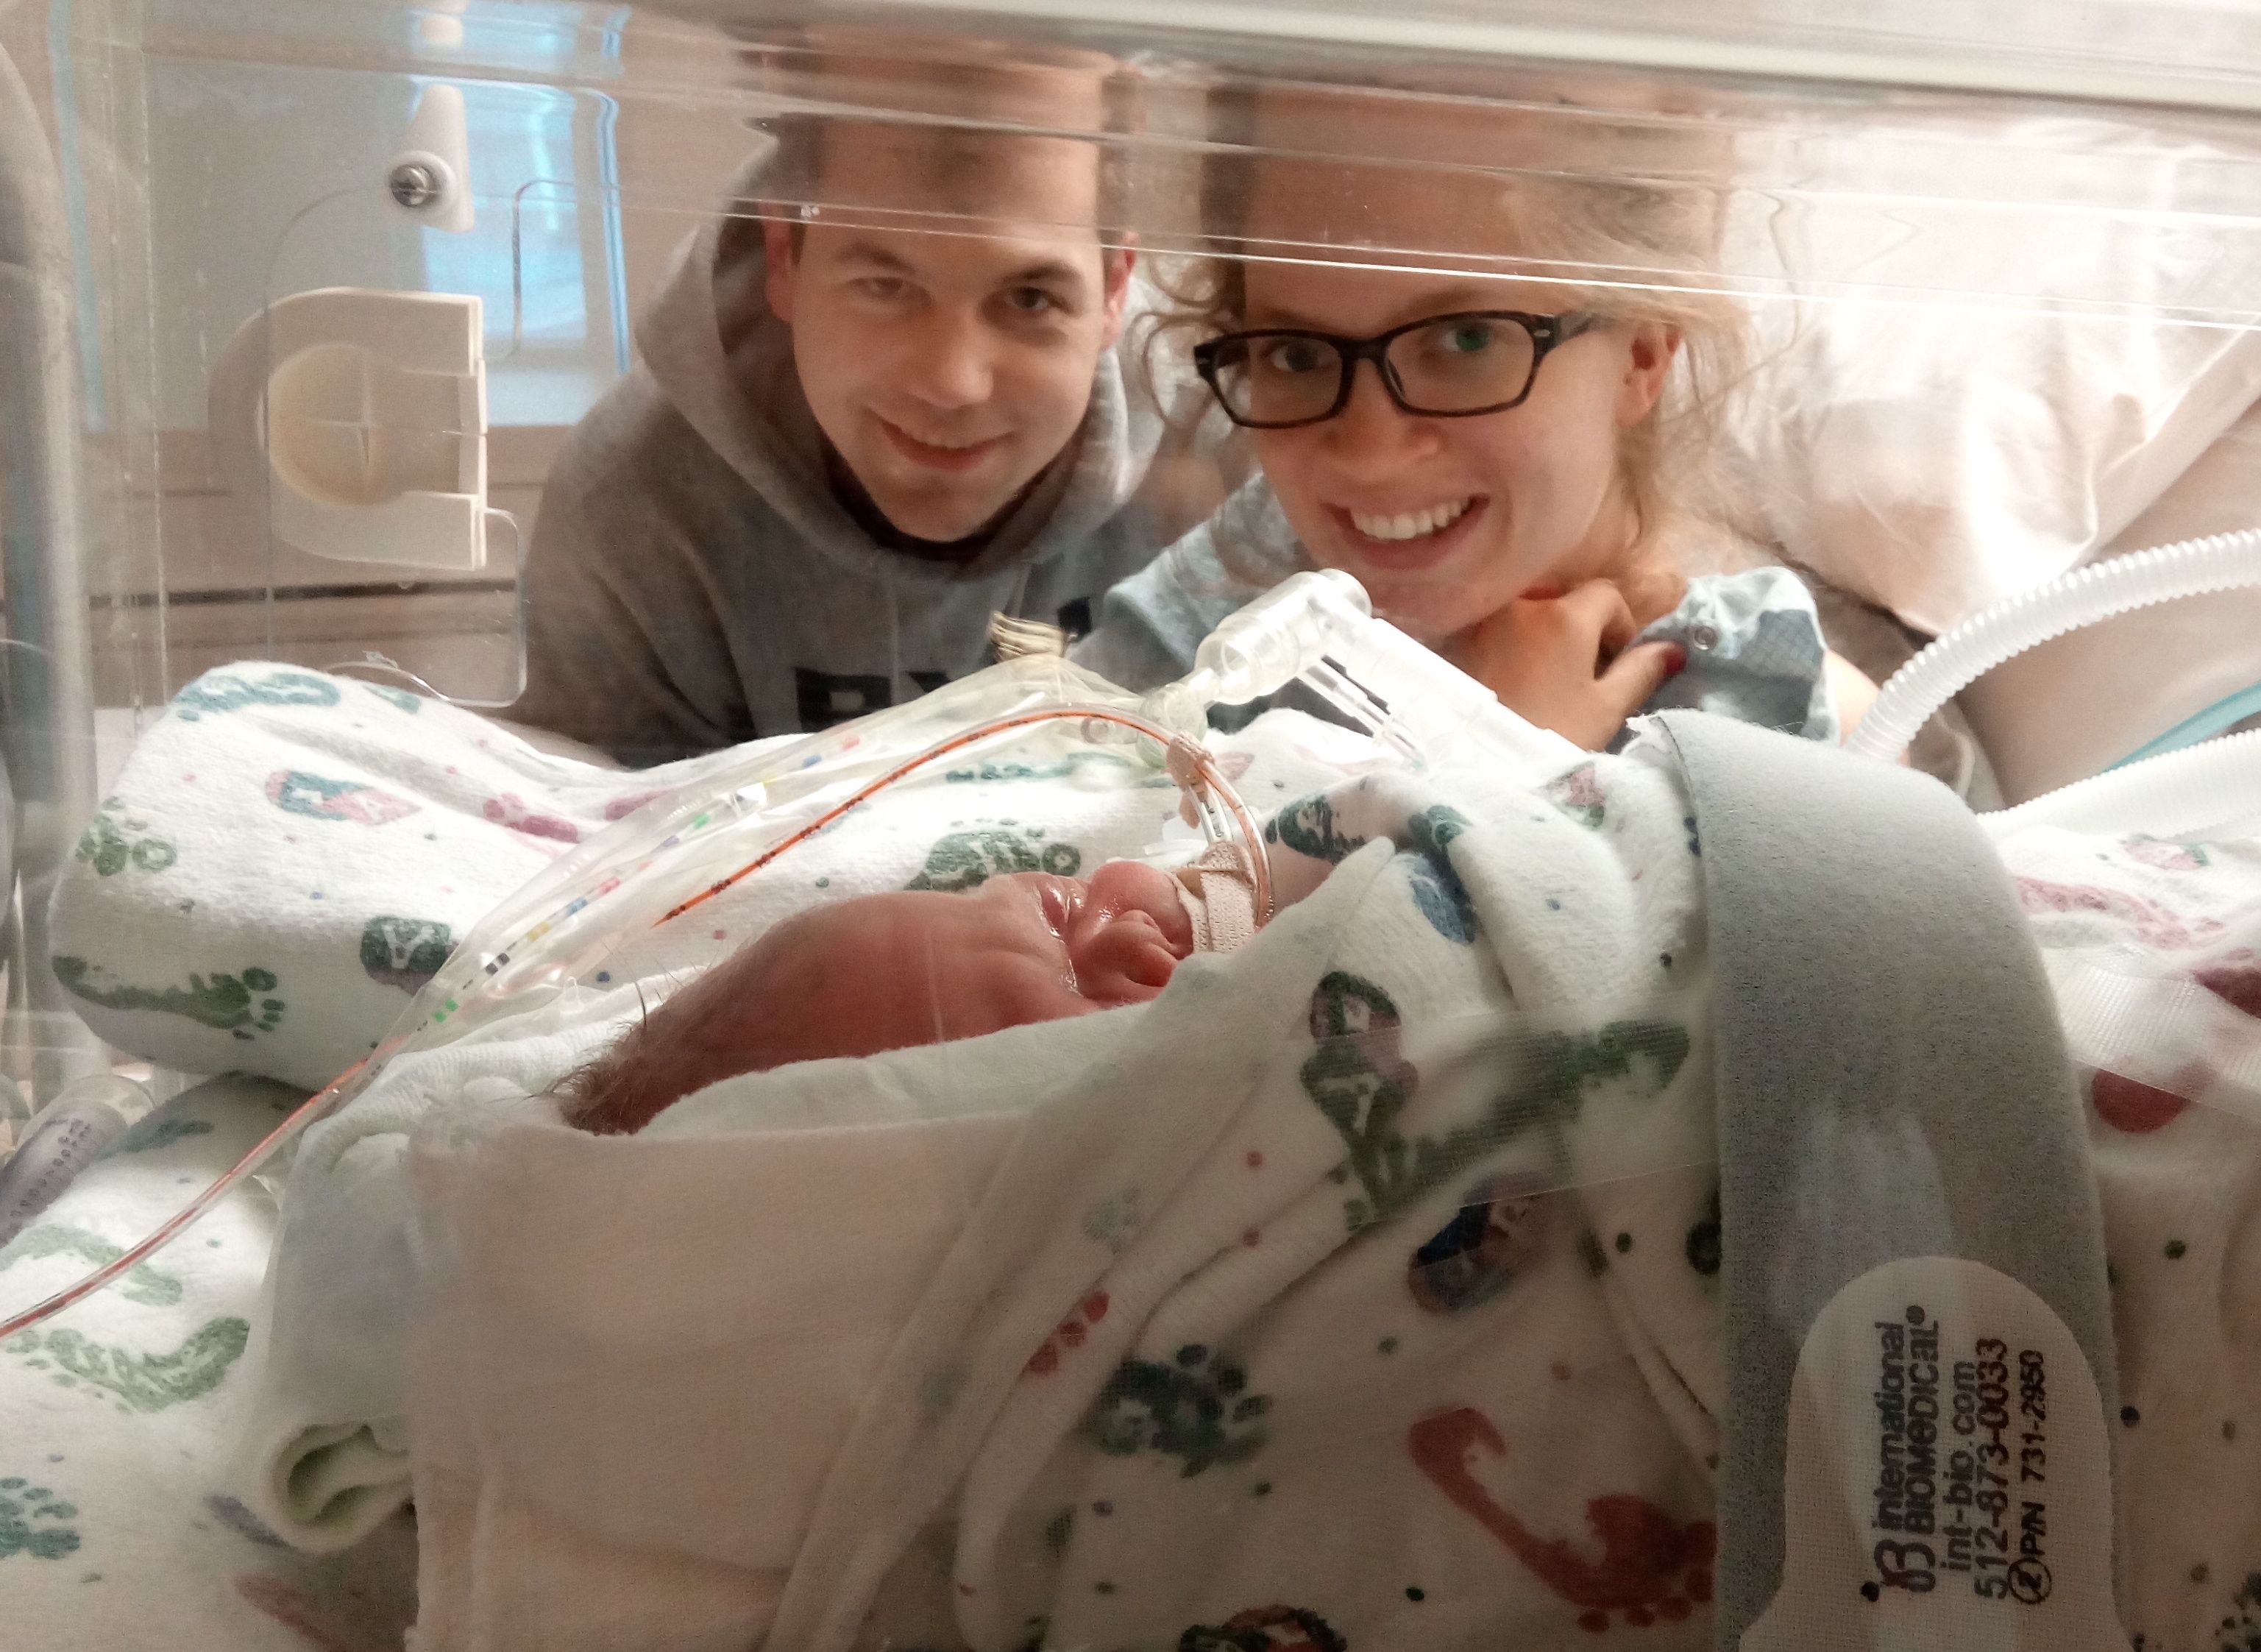 Baby Kimball in the NICU. Mom an dad are standing behind.